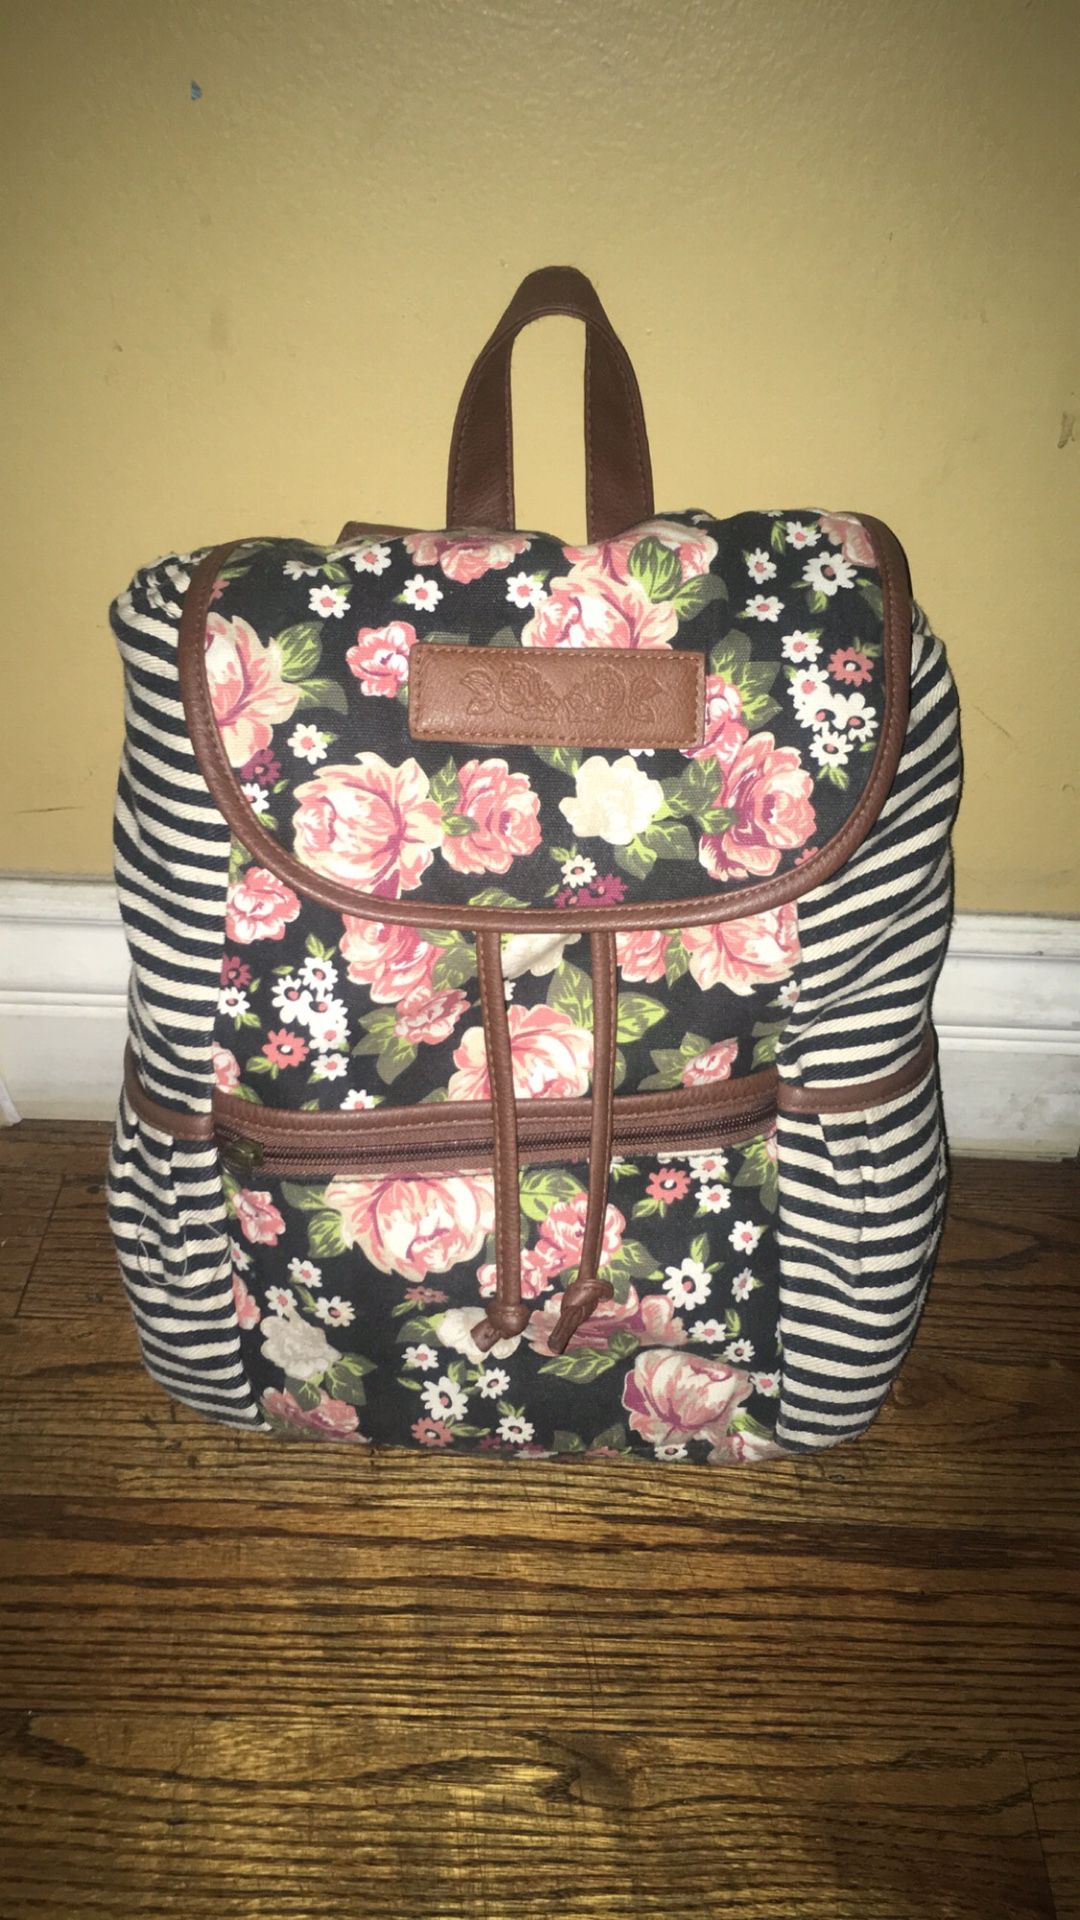 Pink floral backpack with stripes on side